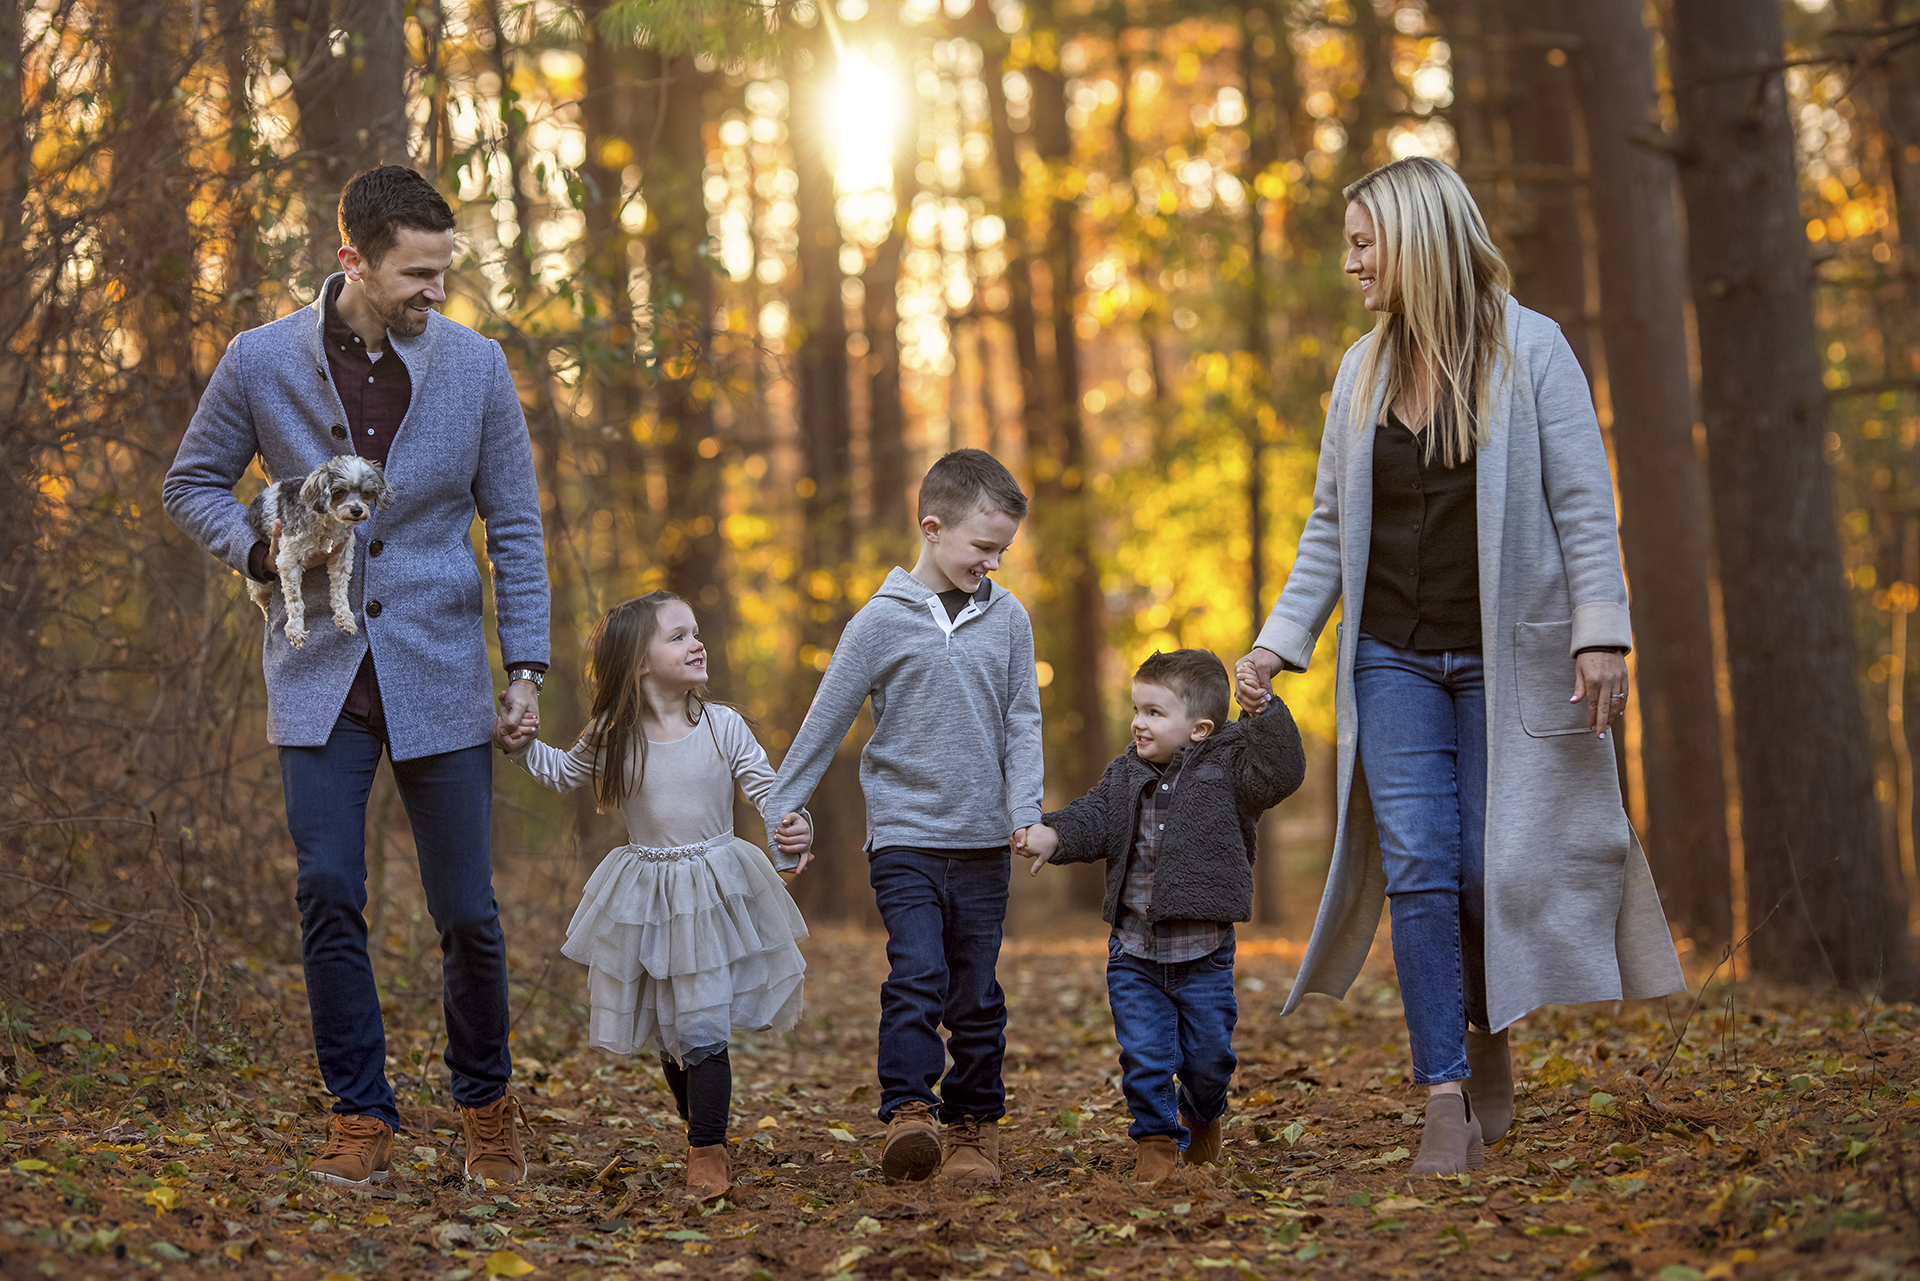 Local Detroit family photographer captures family portrait of a couple walking through a golden, autumn forest with their children, holding hands.